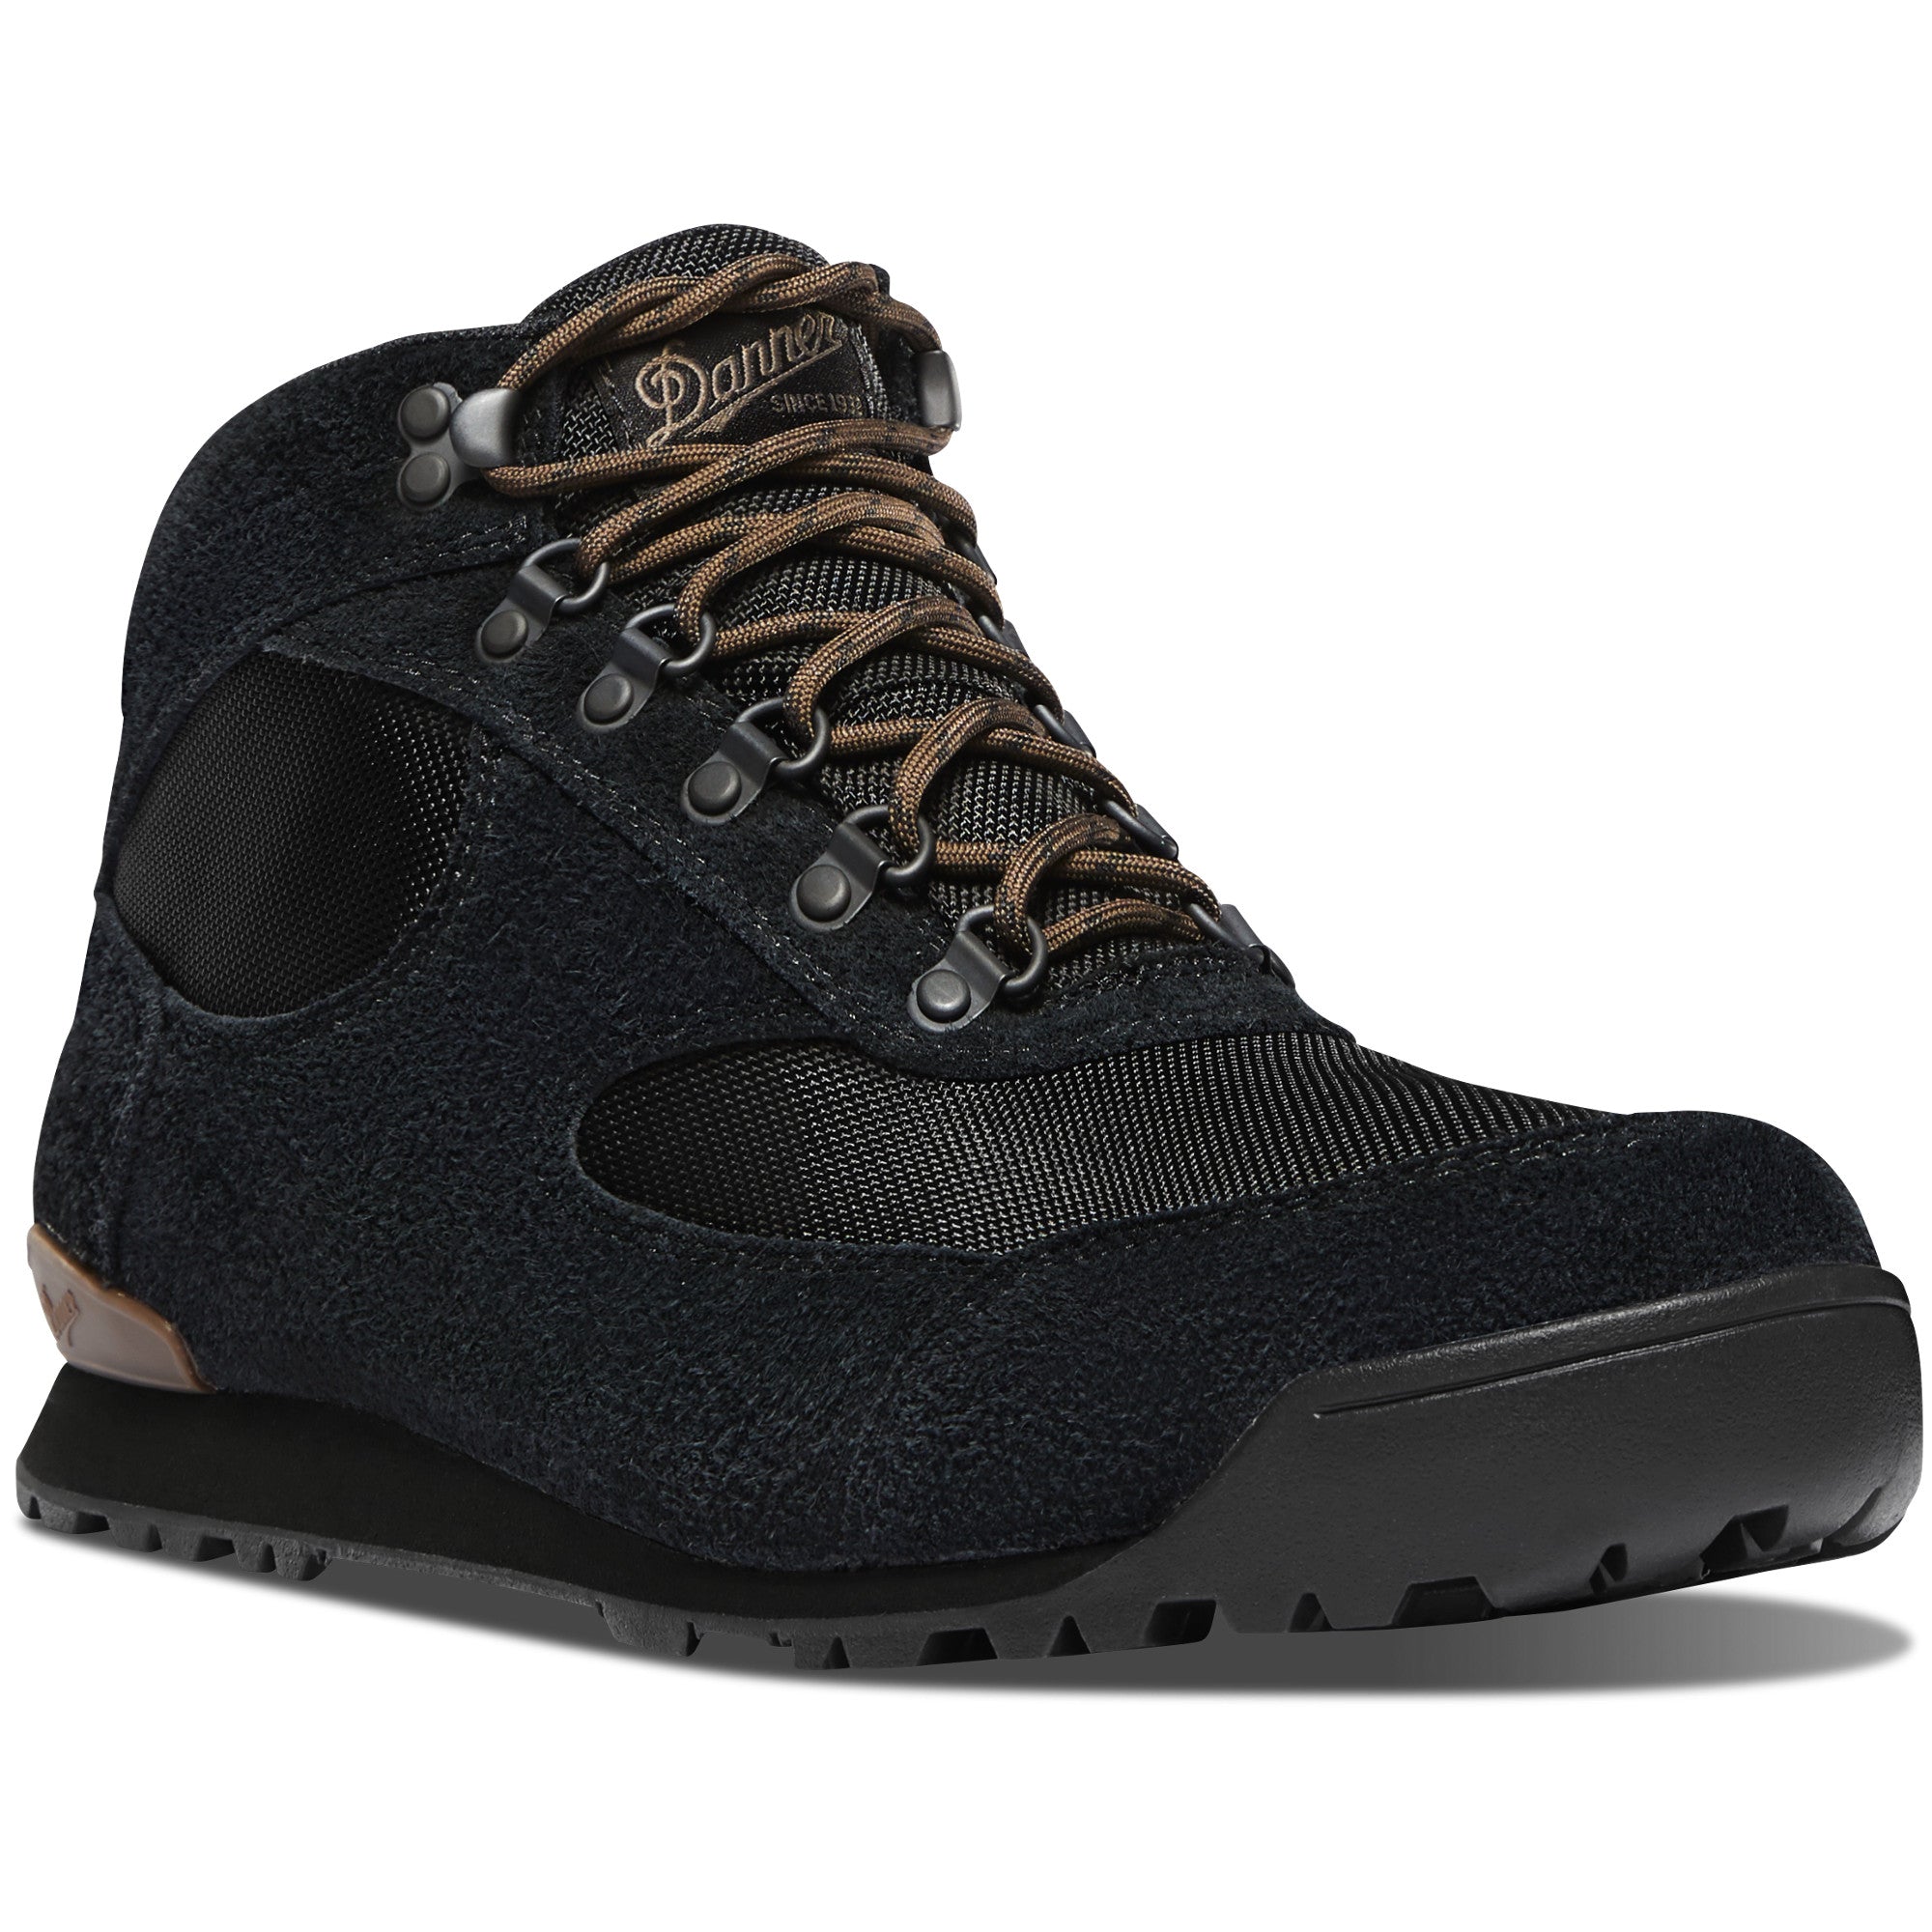 Danner Men's Jag 4.5" Waterproof Hiking Boot in Carbon Black from the side